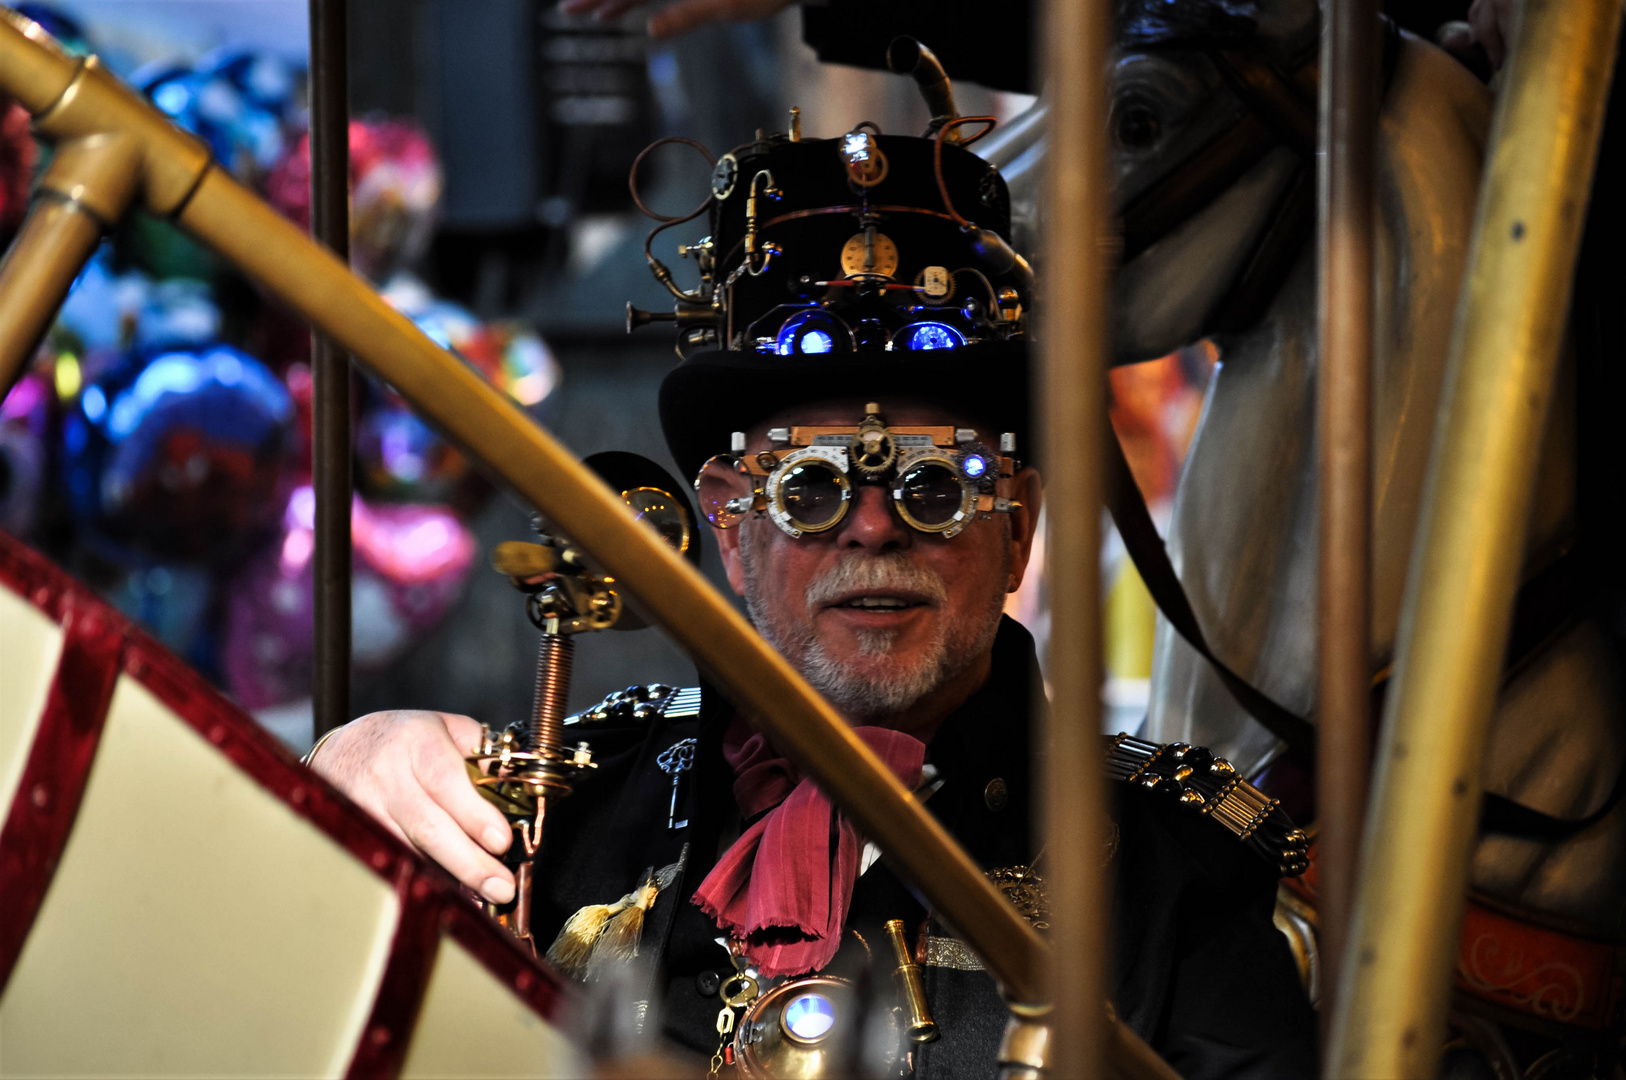 Lord of Steampunk